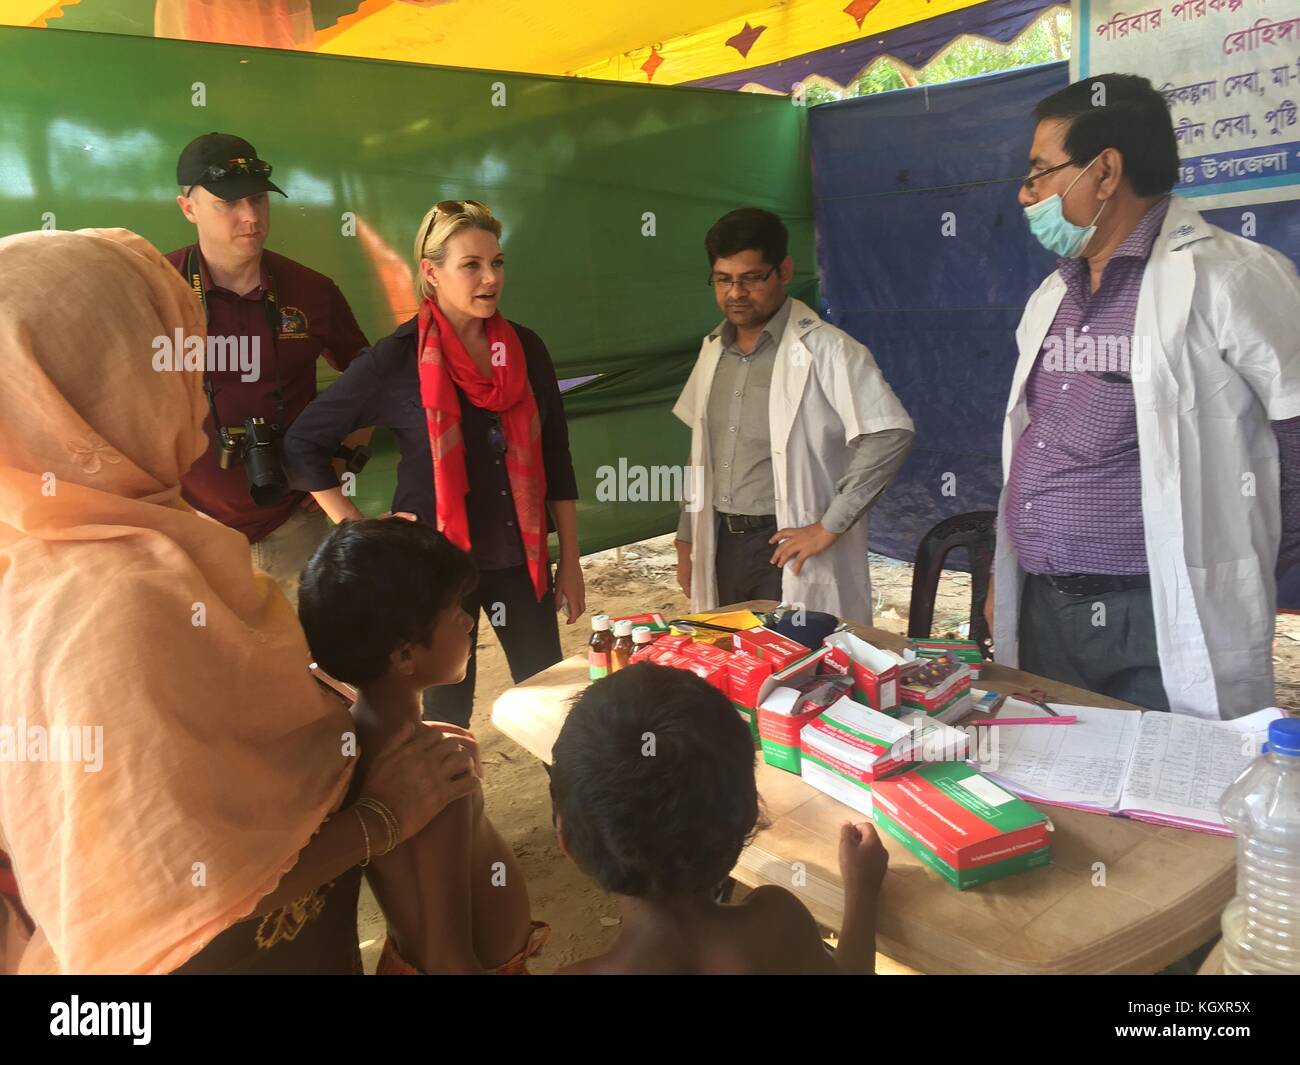 U.S. Department of State Spokesperson Heather Nauert visits a Rohingya refugee camp November 3, 2017 in Coxs Bazar, Bangladesh.   (photo by State Department Photo via Planetpix) Stock Photo